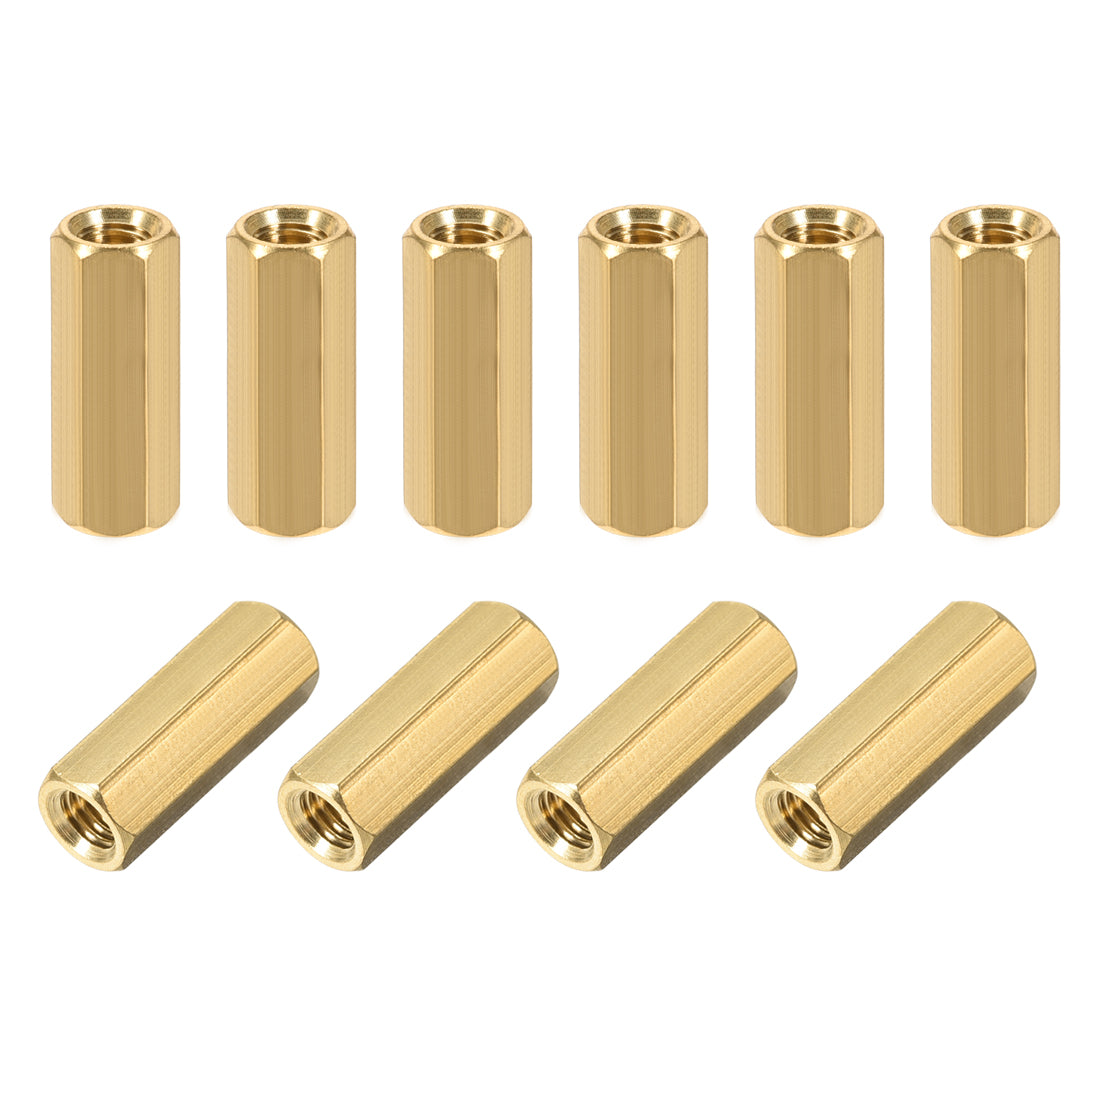 Uxcell Uxcell M5 x 20 mm Female to Female Hex Brass Spacer Standoff 10pcs